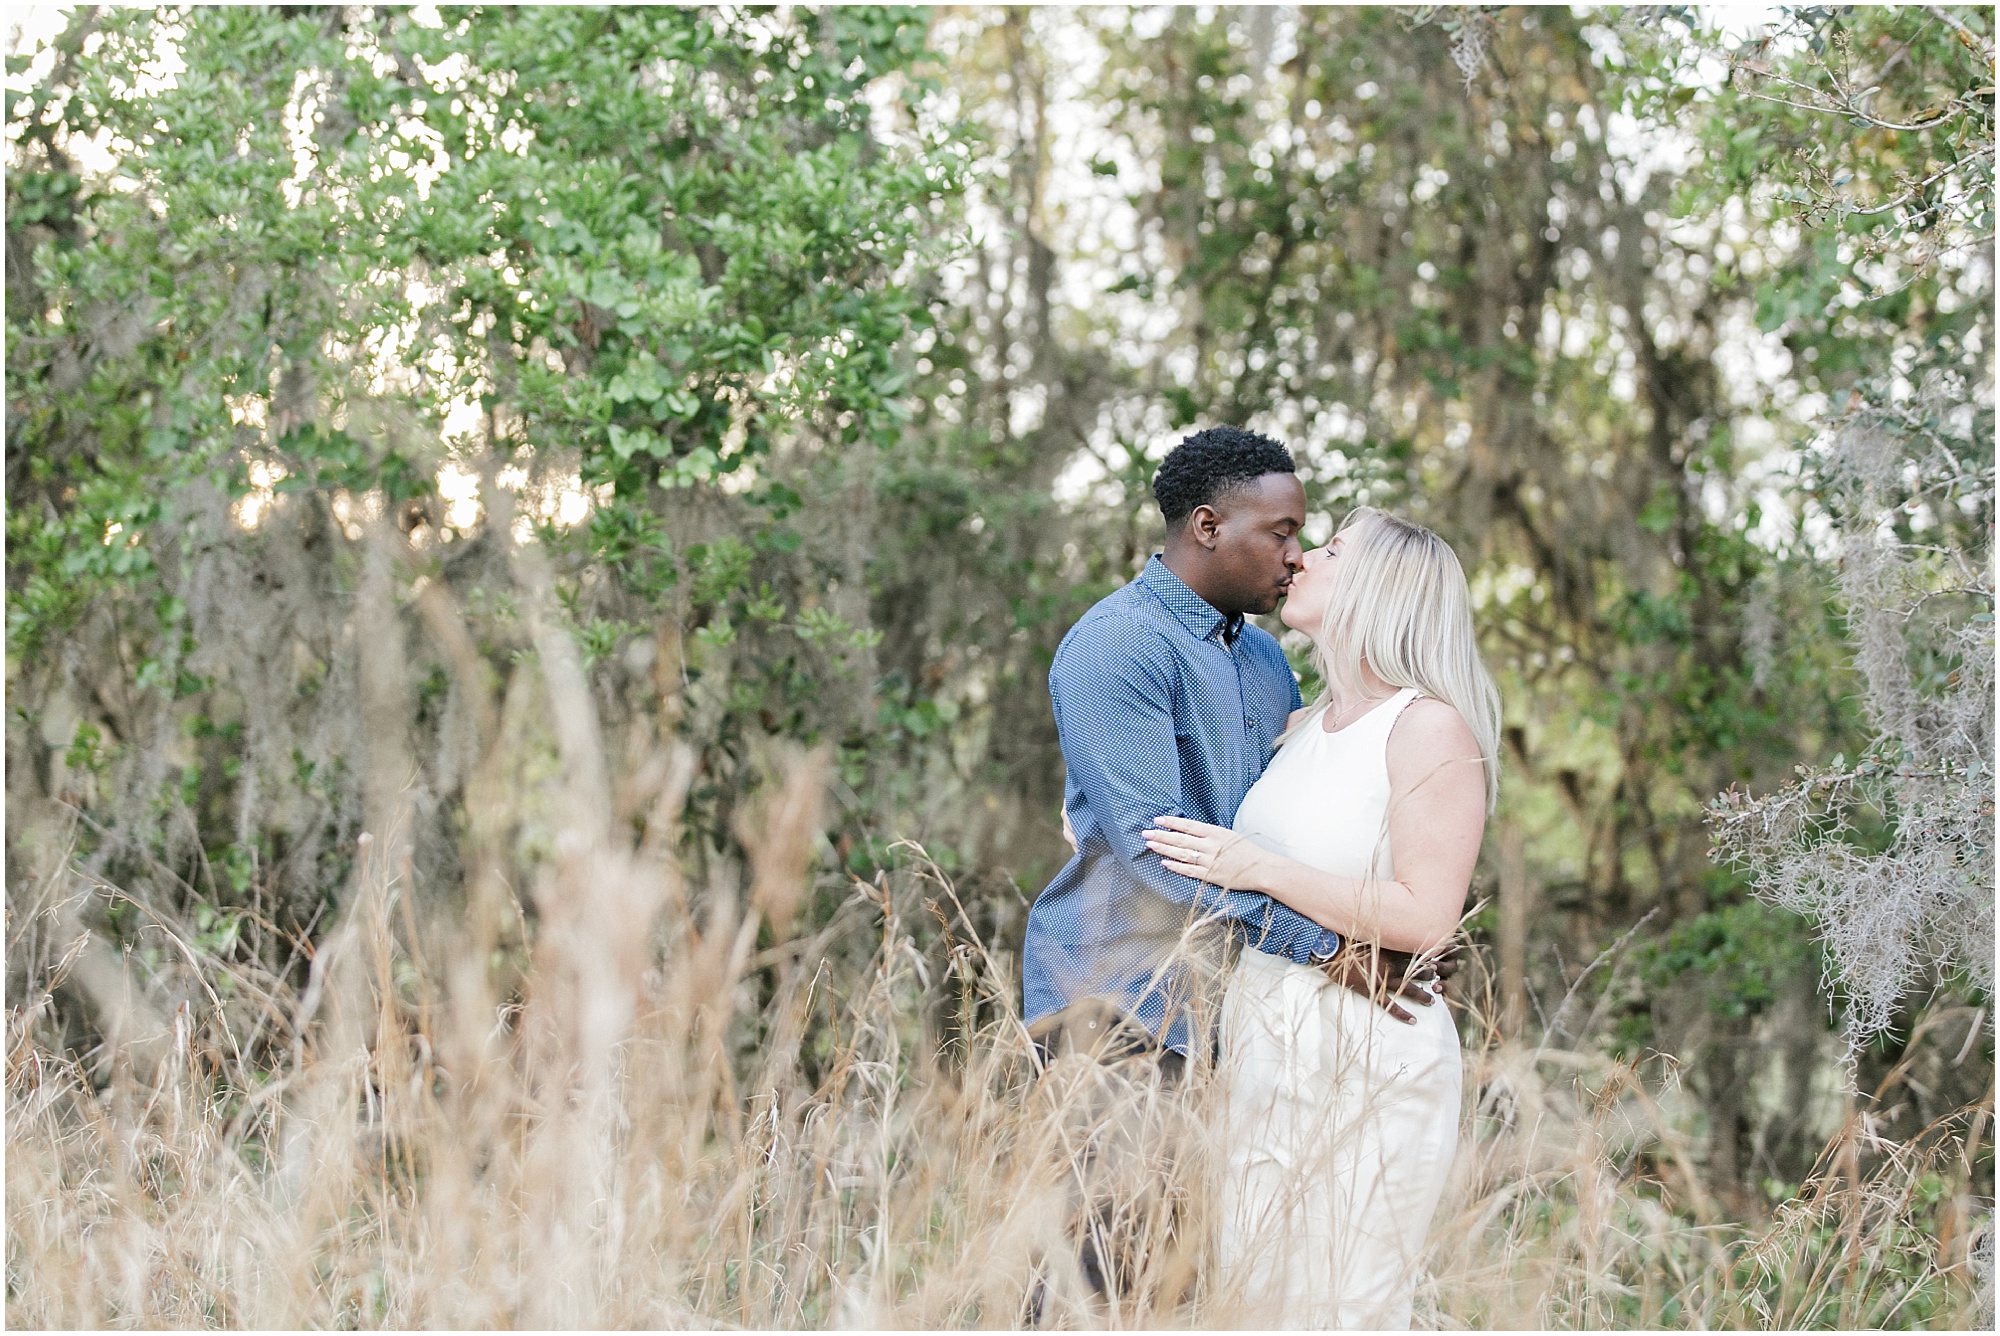 Lake Nona Engagement couple standing in tall grass with trees behind them.